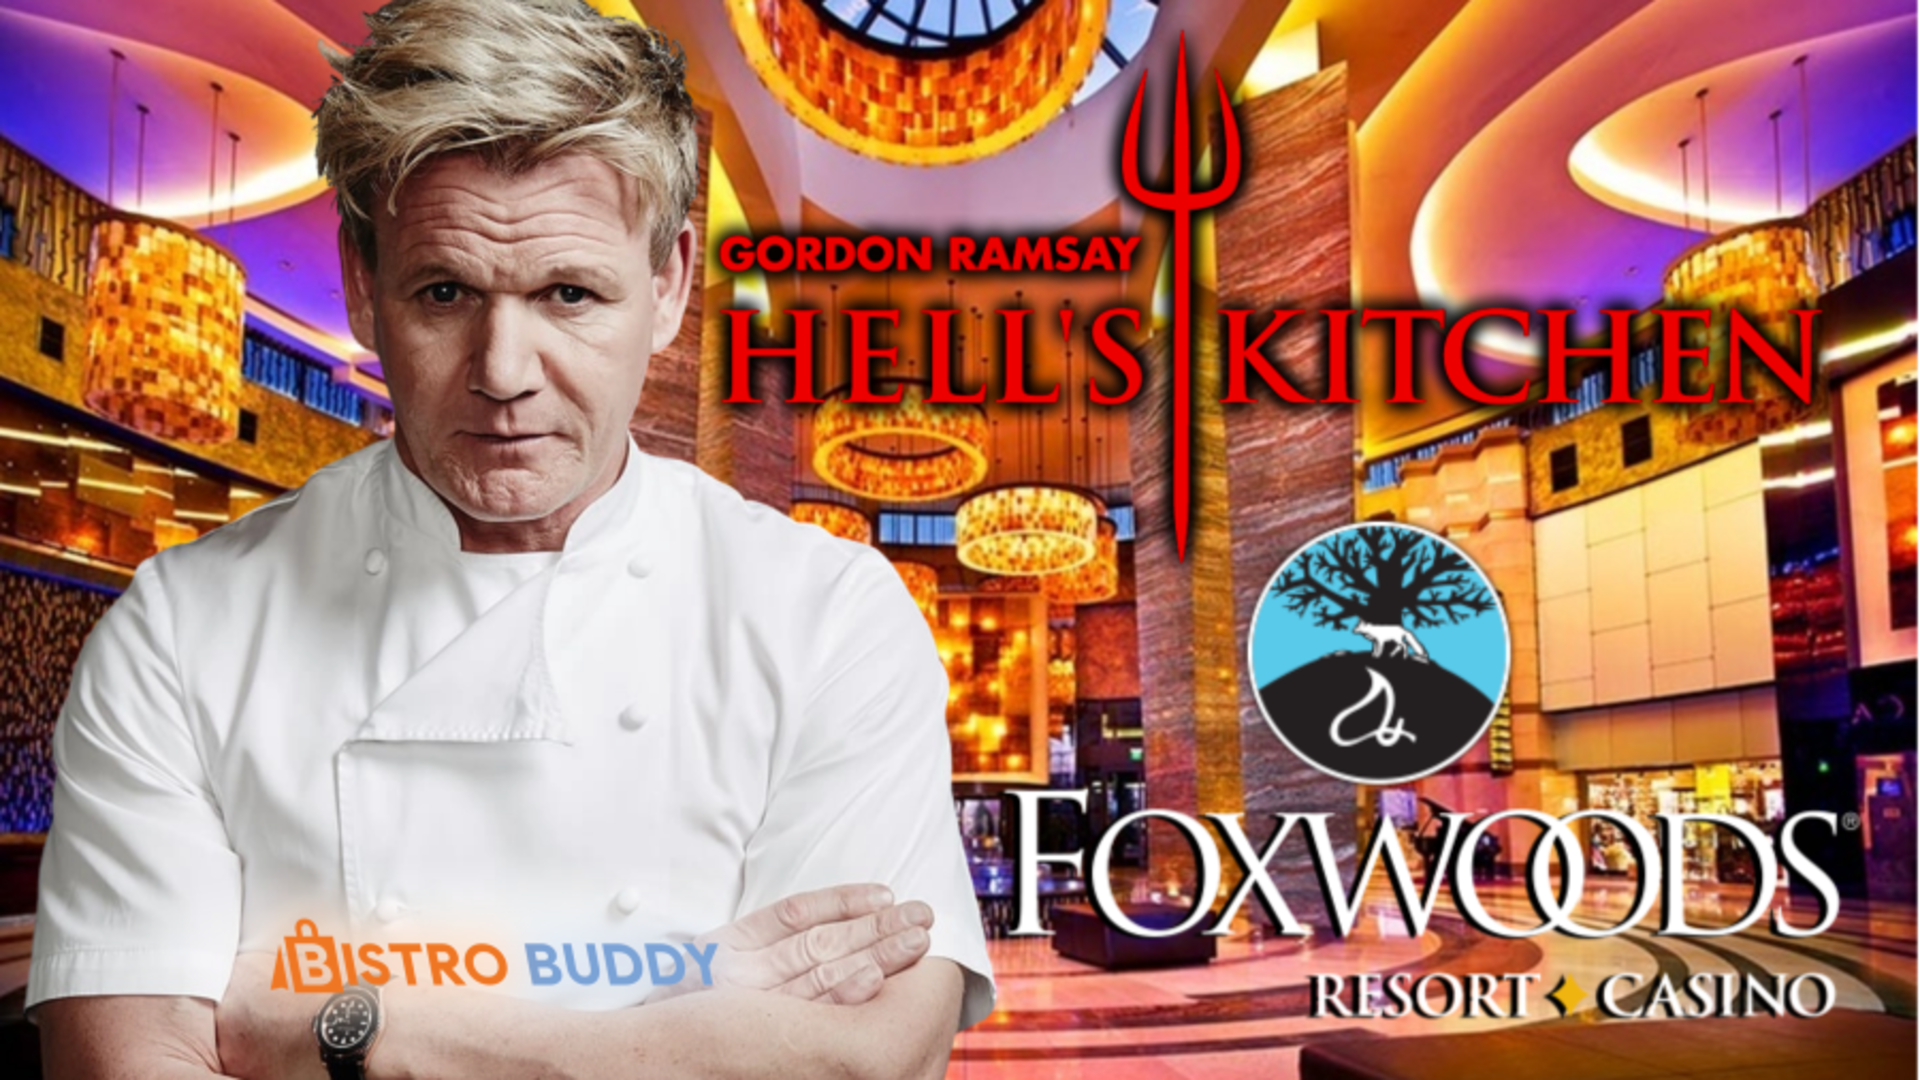 Gordon Ramsay Ignites Connecticut&#039;s Culinary Scene with New Hell&#039;s Kitchen Restaurant at Foxwoods